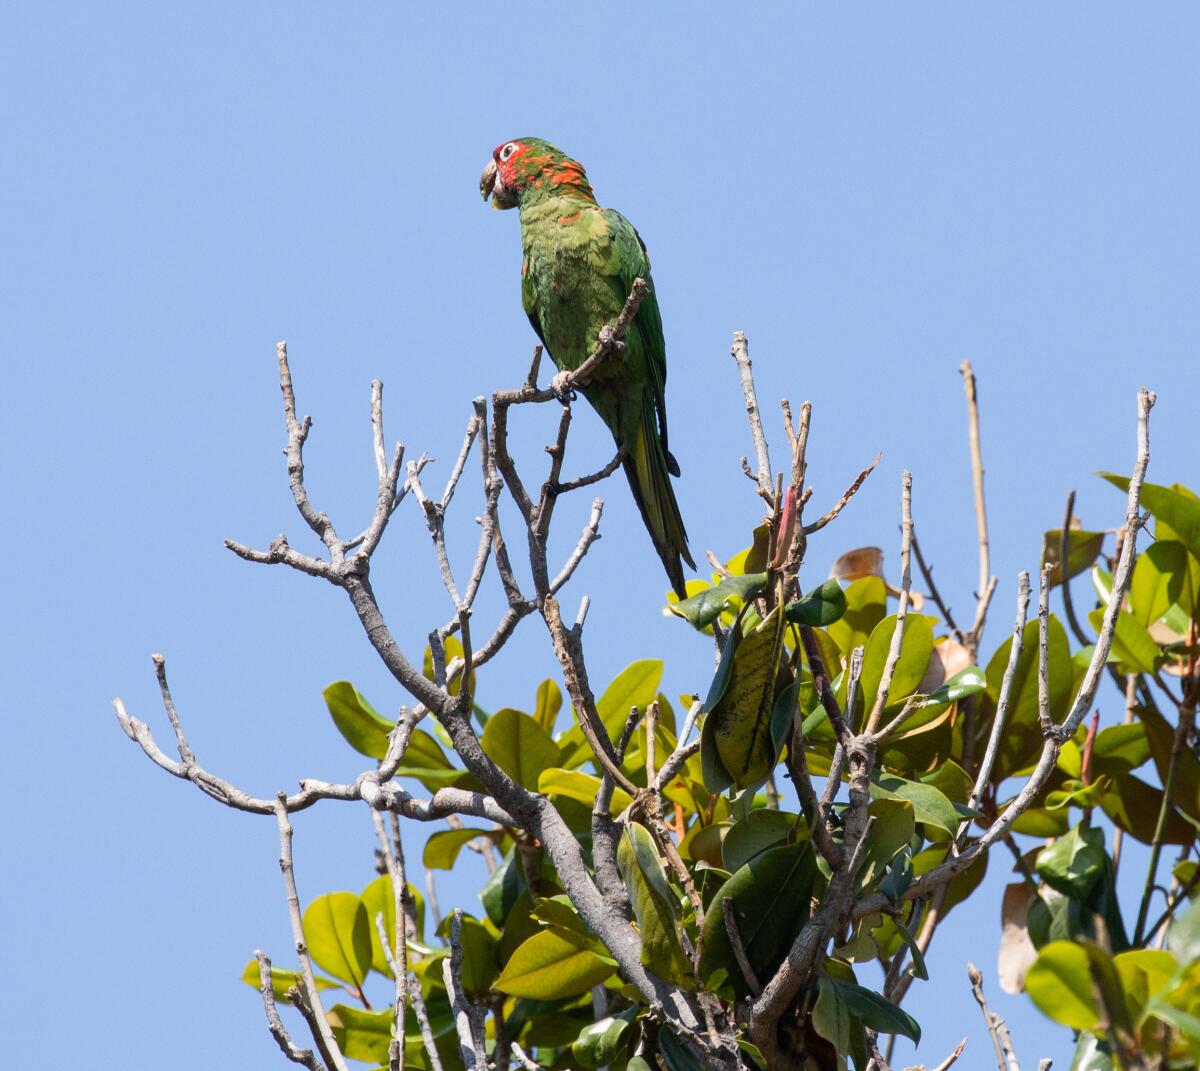 A green bird on a branch with leaves